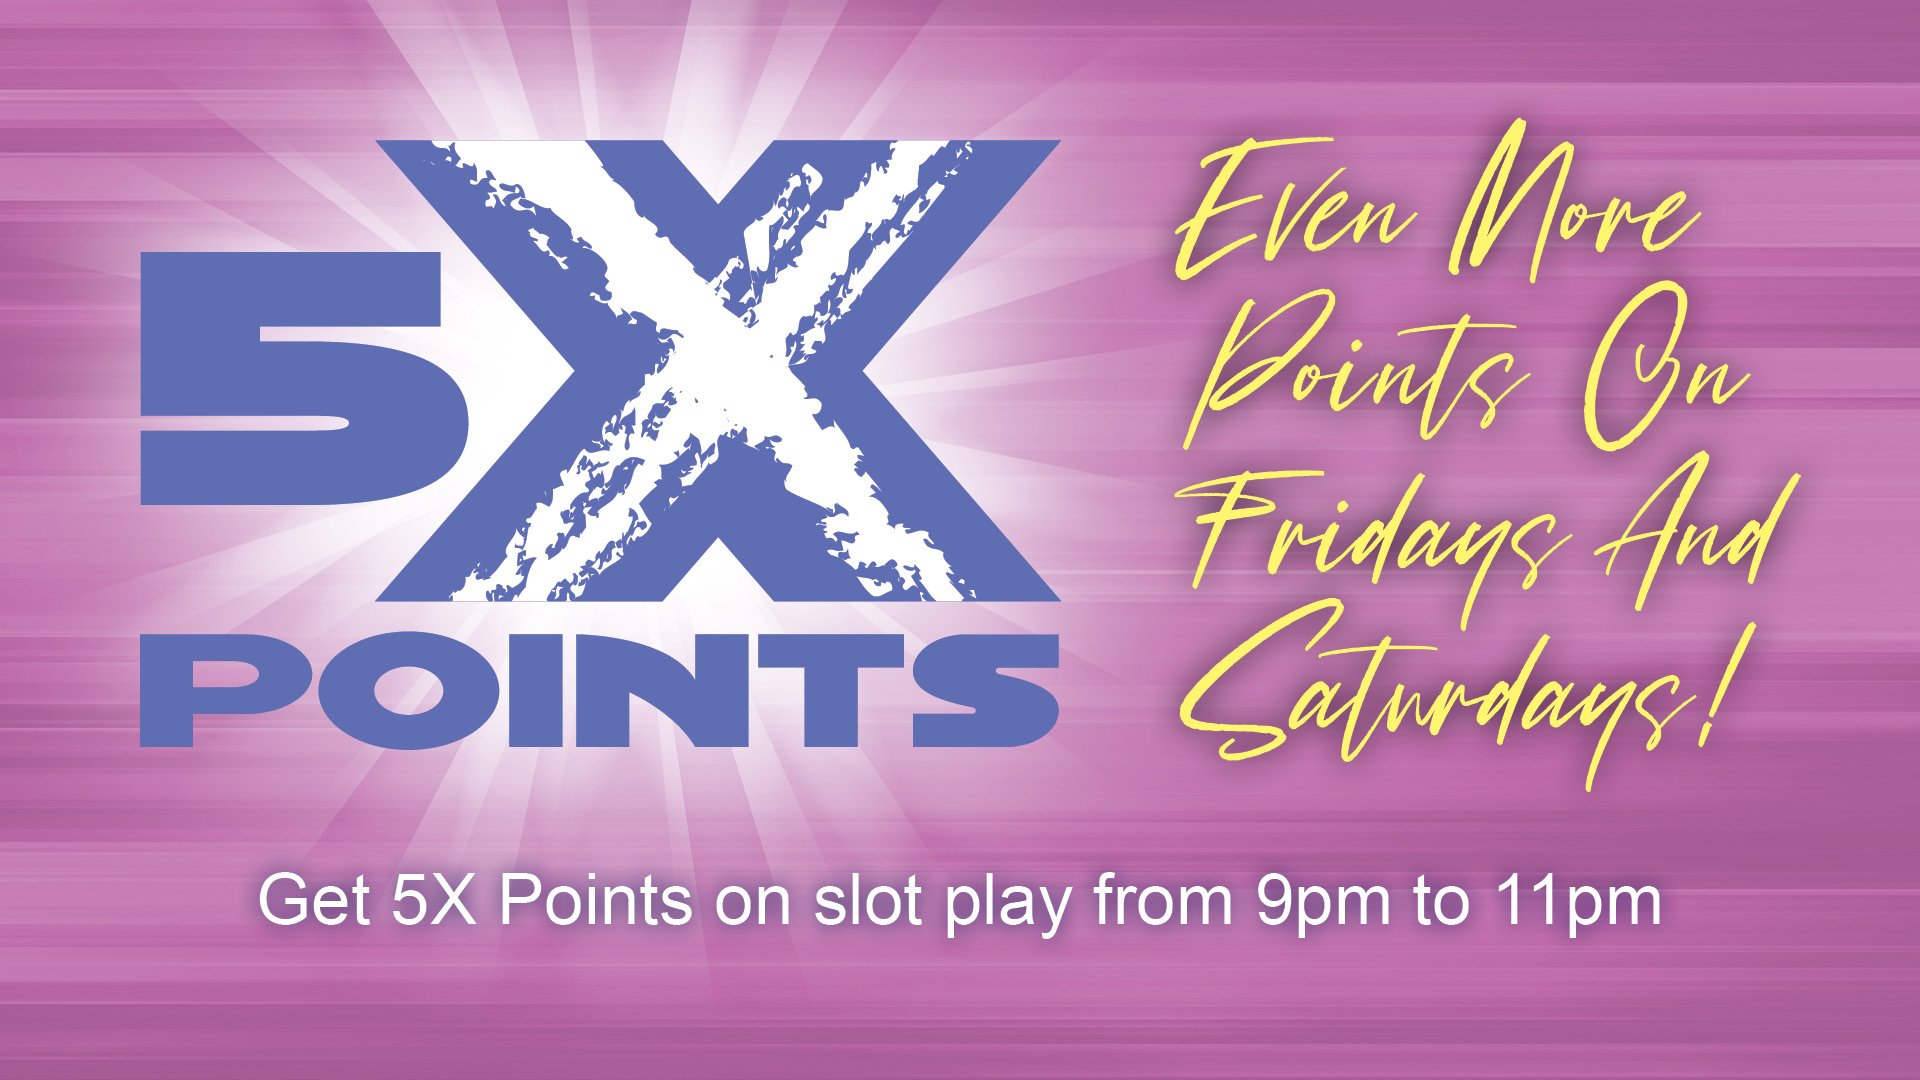 5X Points on Fridays and Saturdays